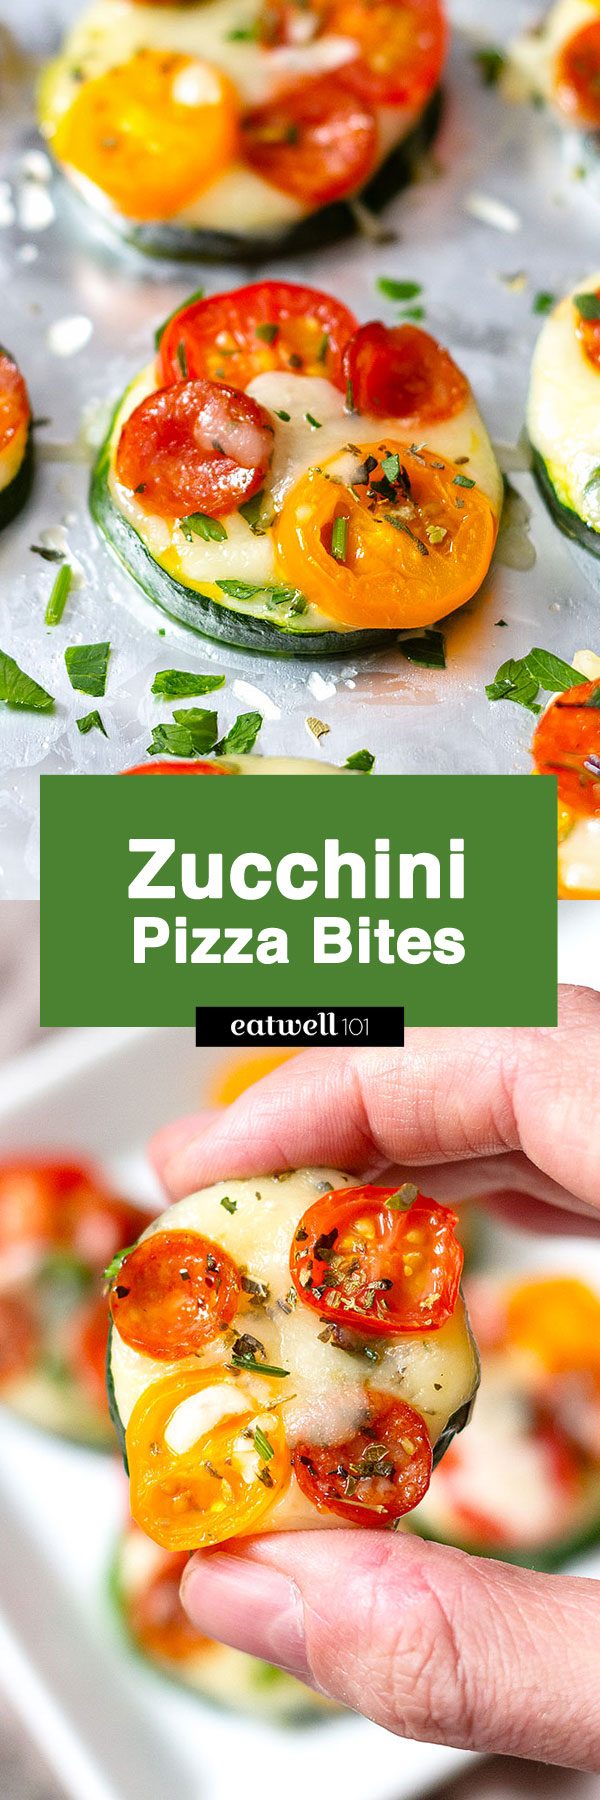 These Mini Zucchini Pizzas - #zucchini #pizza #recipe #eatwell101 -  cheesy comfort without any of the guilt!